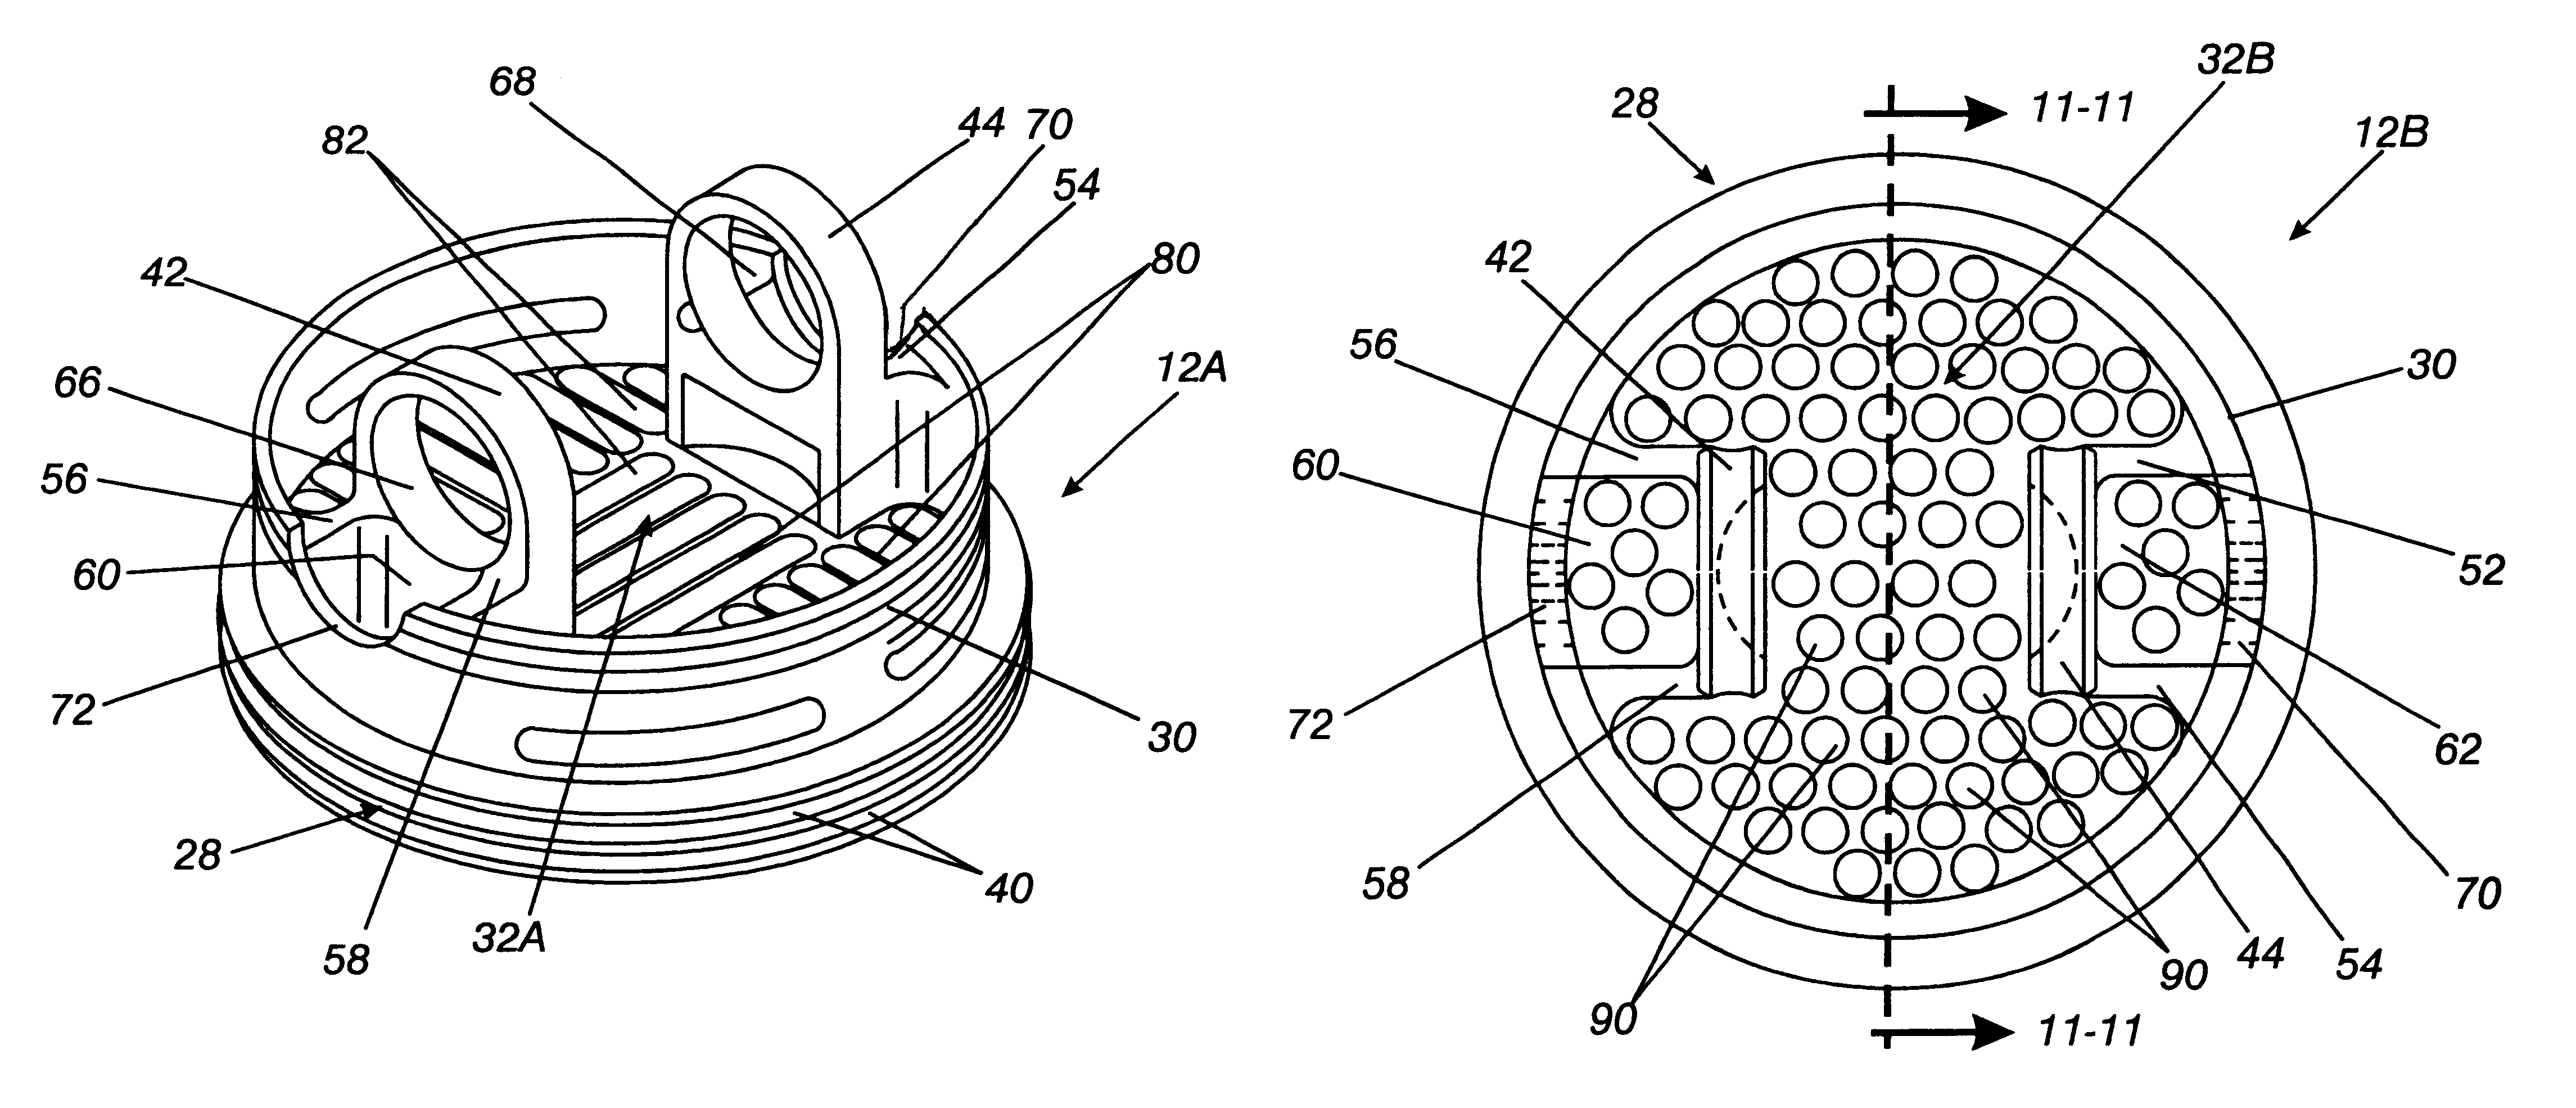 Two-piece piston assembly